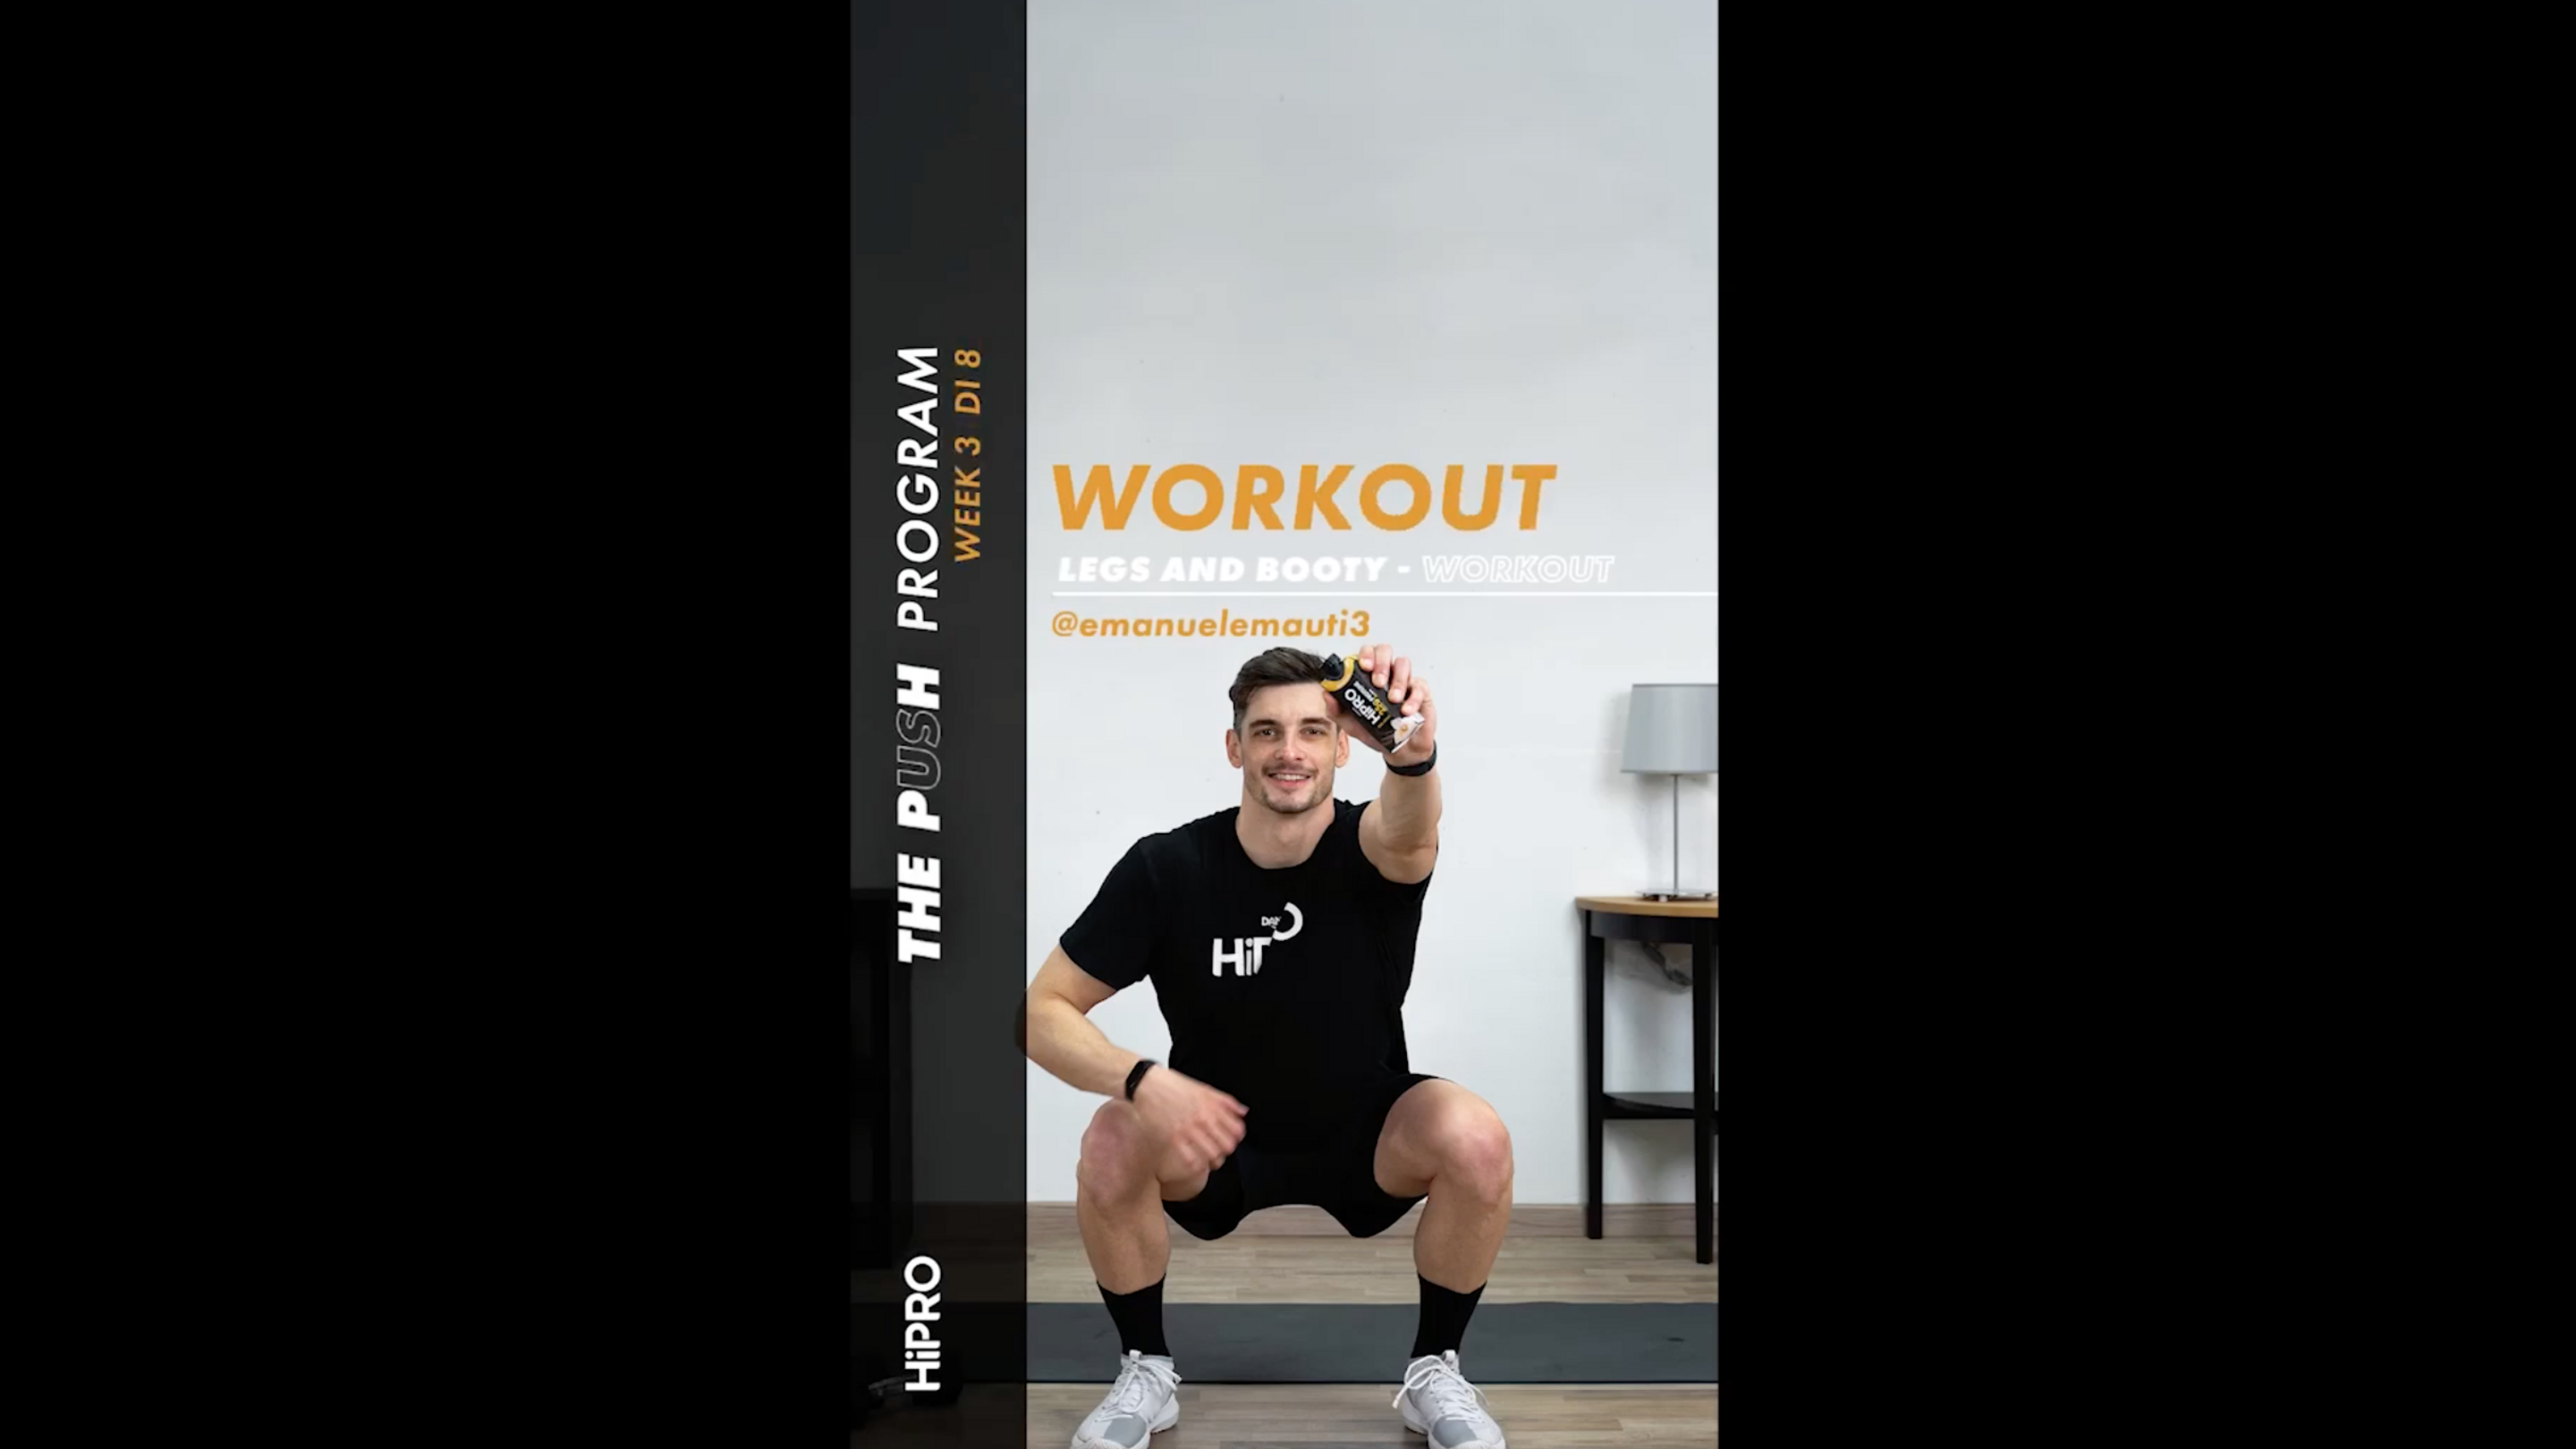 Killer Workout - Legs and booty 1 M Sessione 1